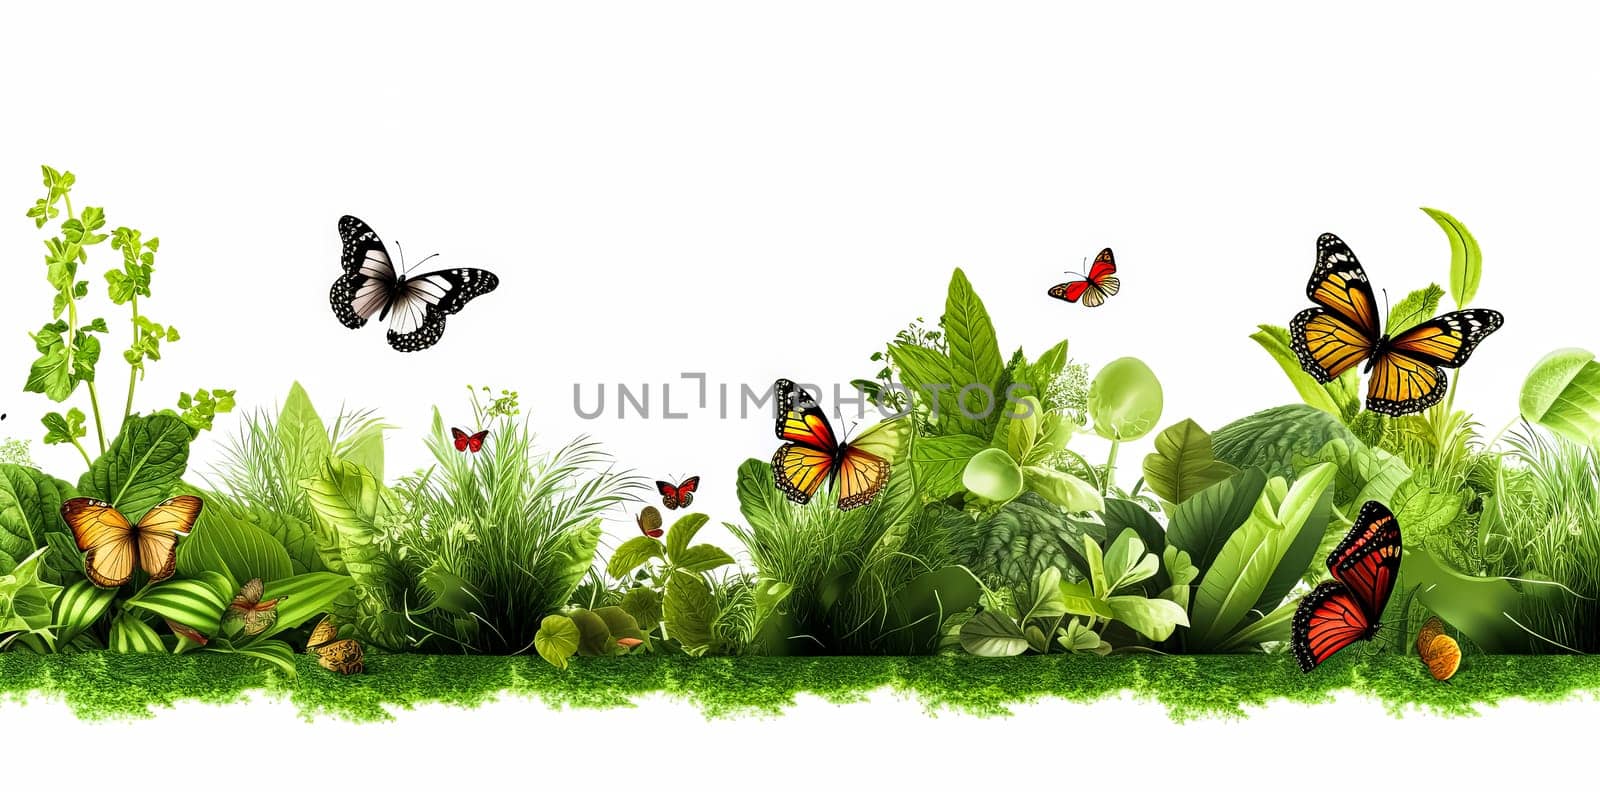 Seamless horizontal border featuring abstract yellow flowers, green leaves, plants, and flying butterflies. Watercolor pattern on white background, ideal for illustrations of summer meadows.